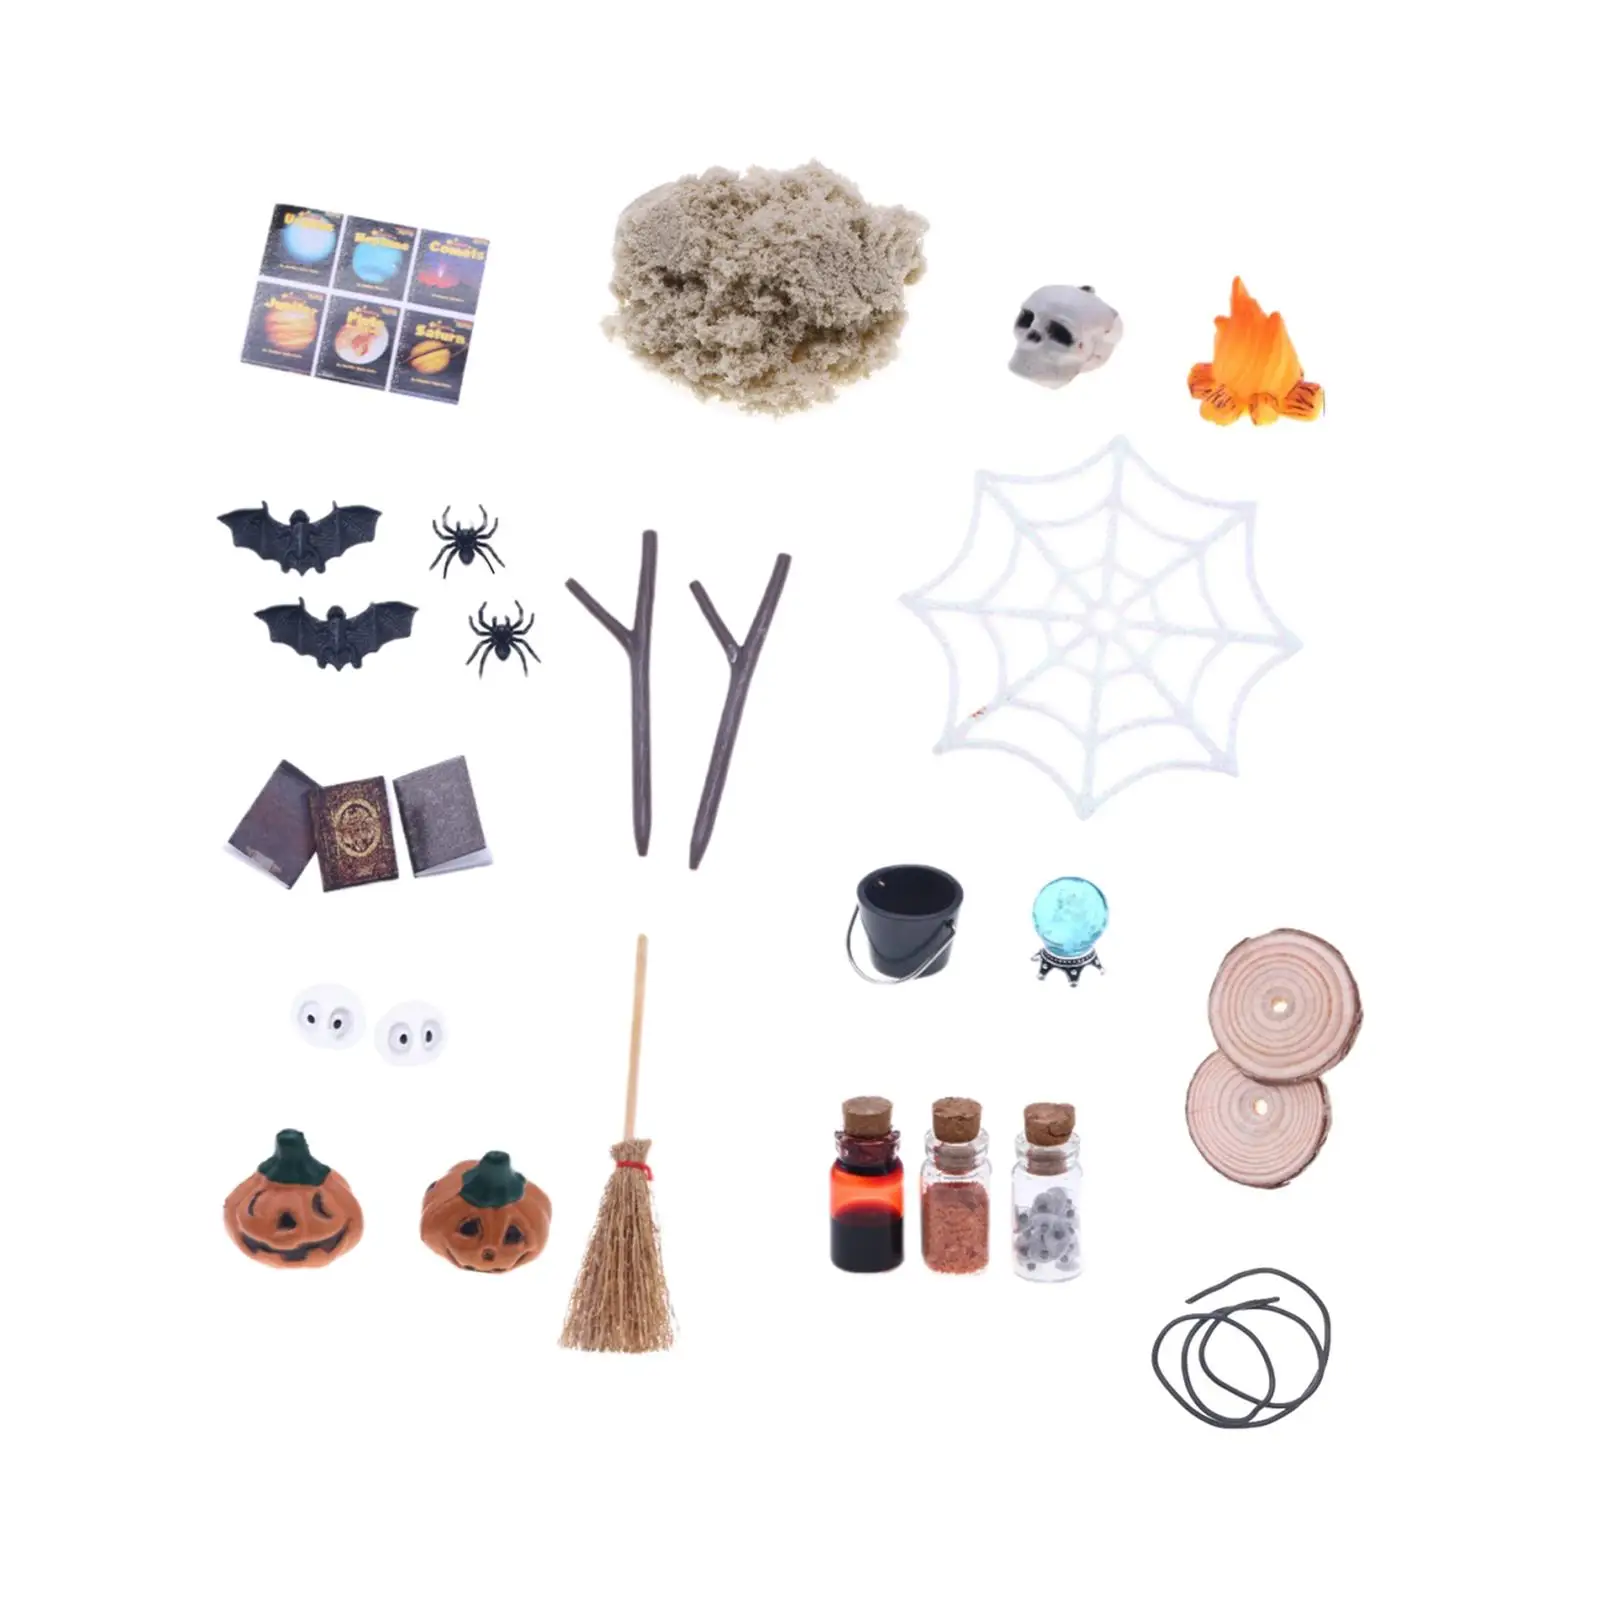 27Pcs Dollhouse Halloween Ornament Kit Gift DIY Pretend Play Halloween Micro Landscape Ornament for Home Room Bedroom Party